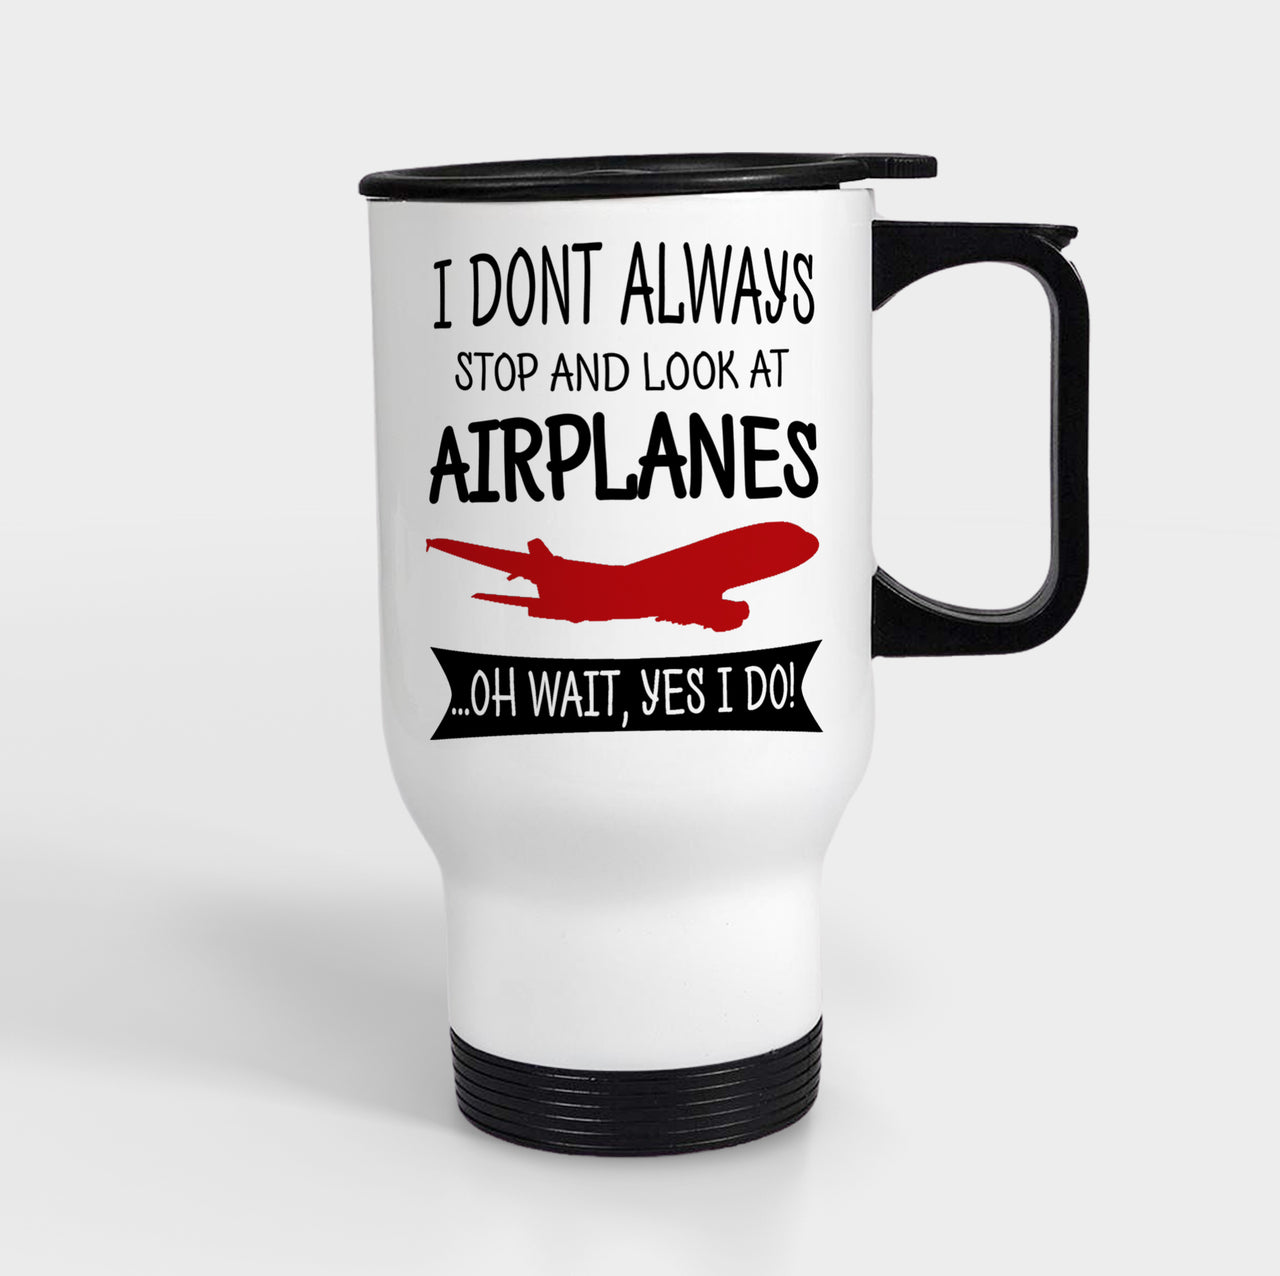 I Don't Always Stop and Look at Airplanes Designed Travel Mugs (With Holder)